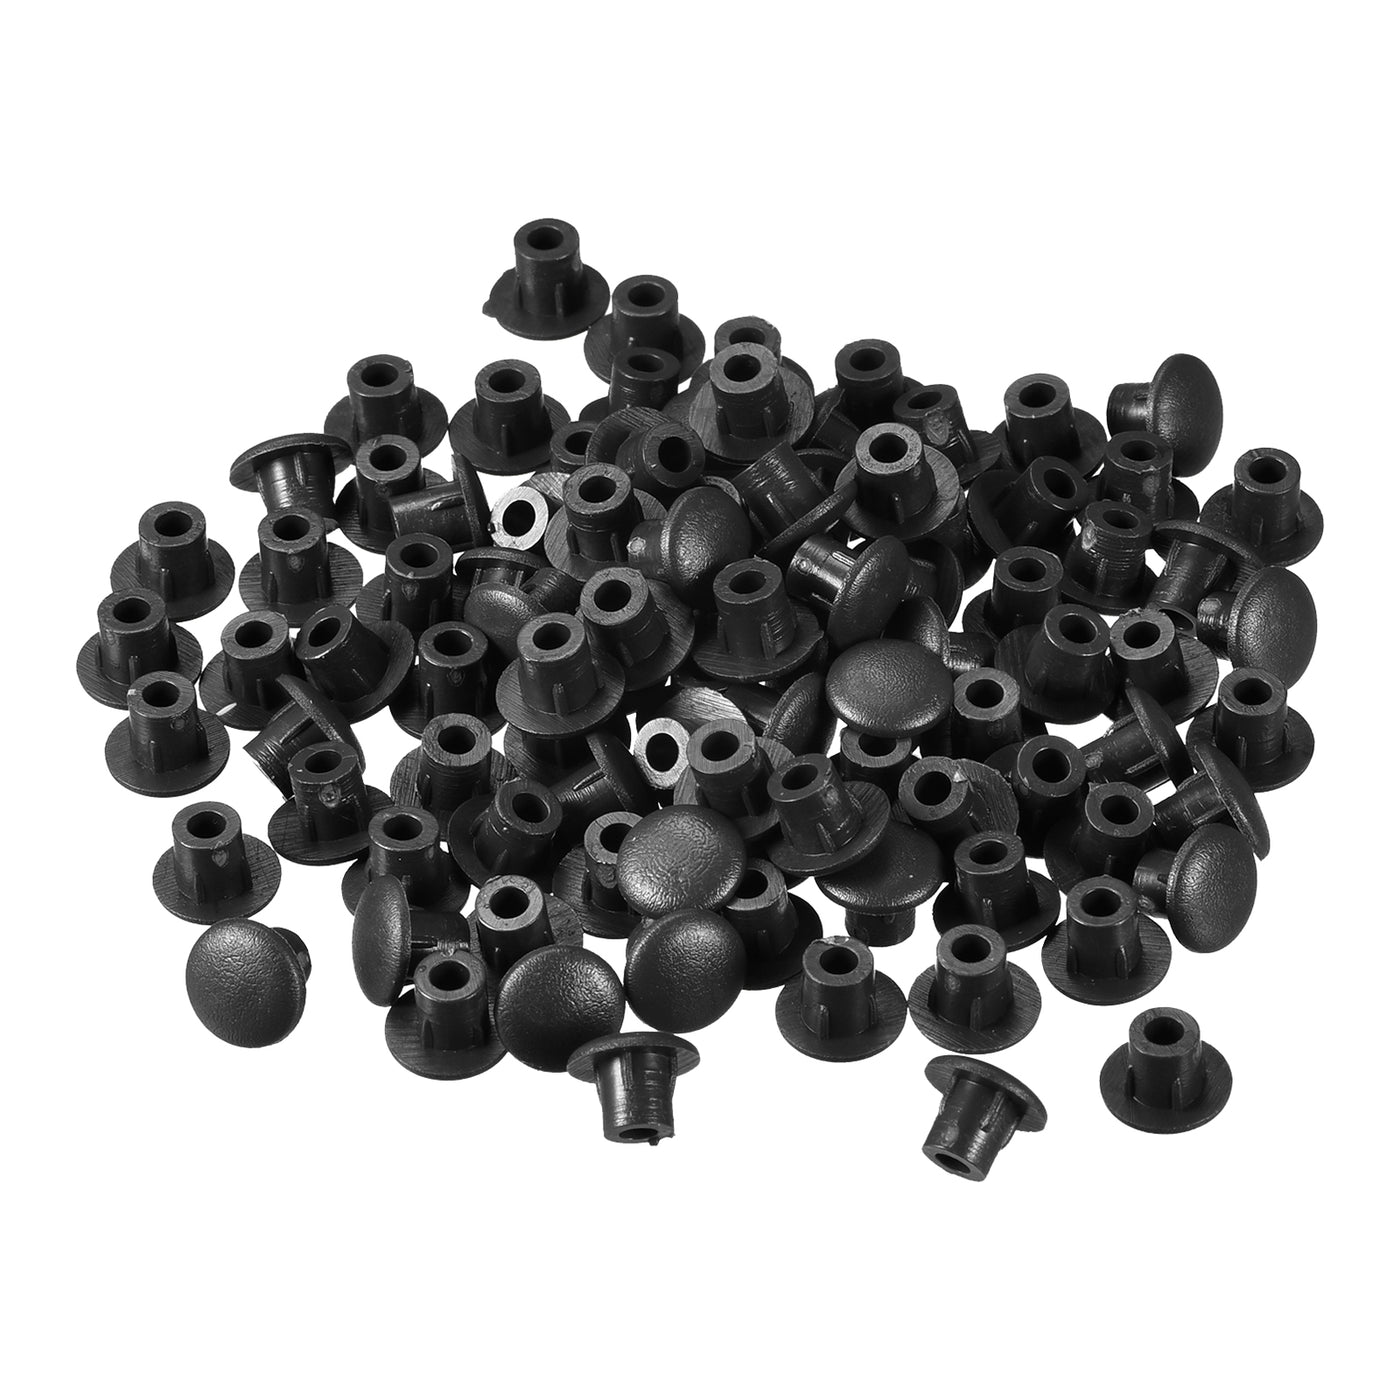 uxcell Uxcell Screw Hole Plugs, 10mm(25/64") Dia PP Snap in Shelf Button Flush Type Caps for Furniture Cabinet Cupboard, Black 60 Pcs